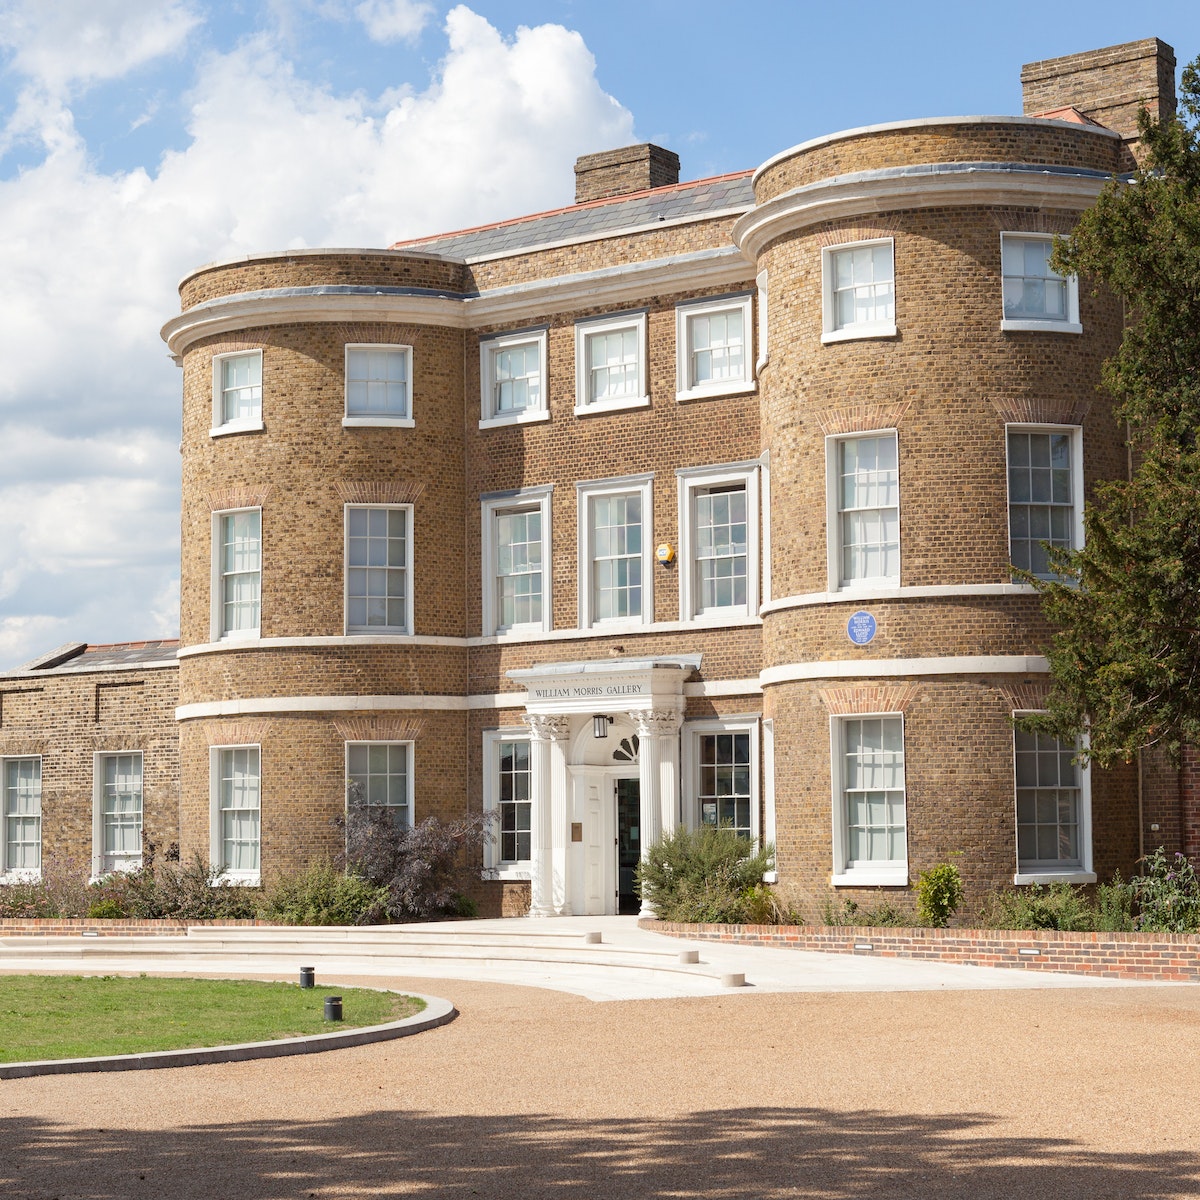 Walthamstow, UK - August 22, 2015: The William Morris Gallery is one of the finest examples of a Georgian house in Greater London.